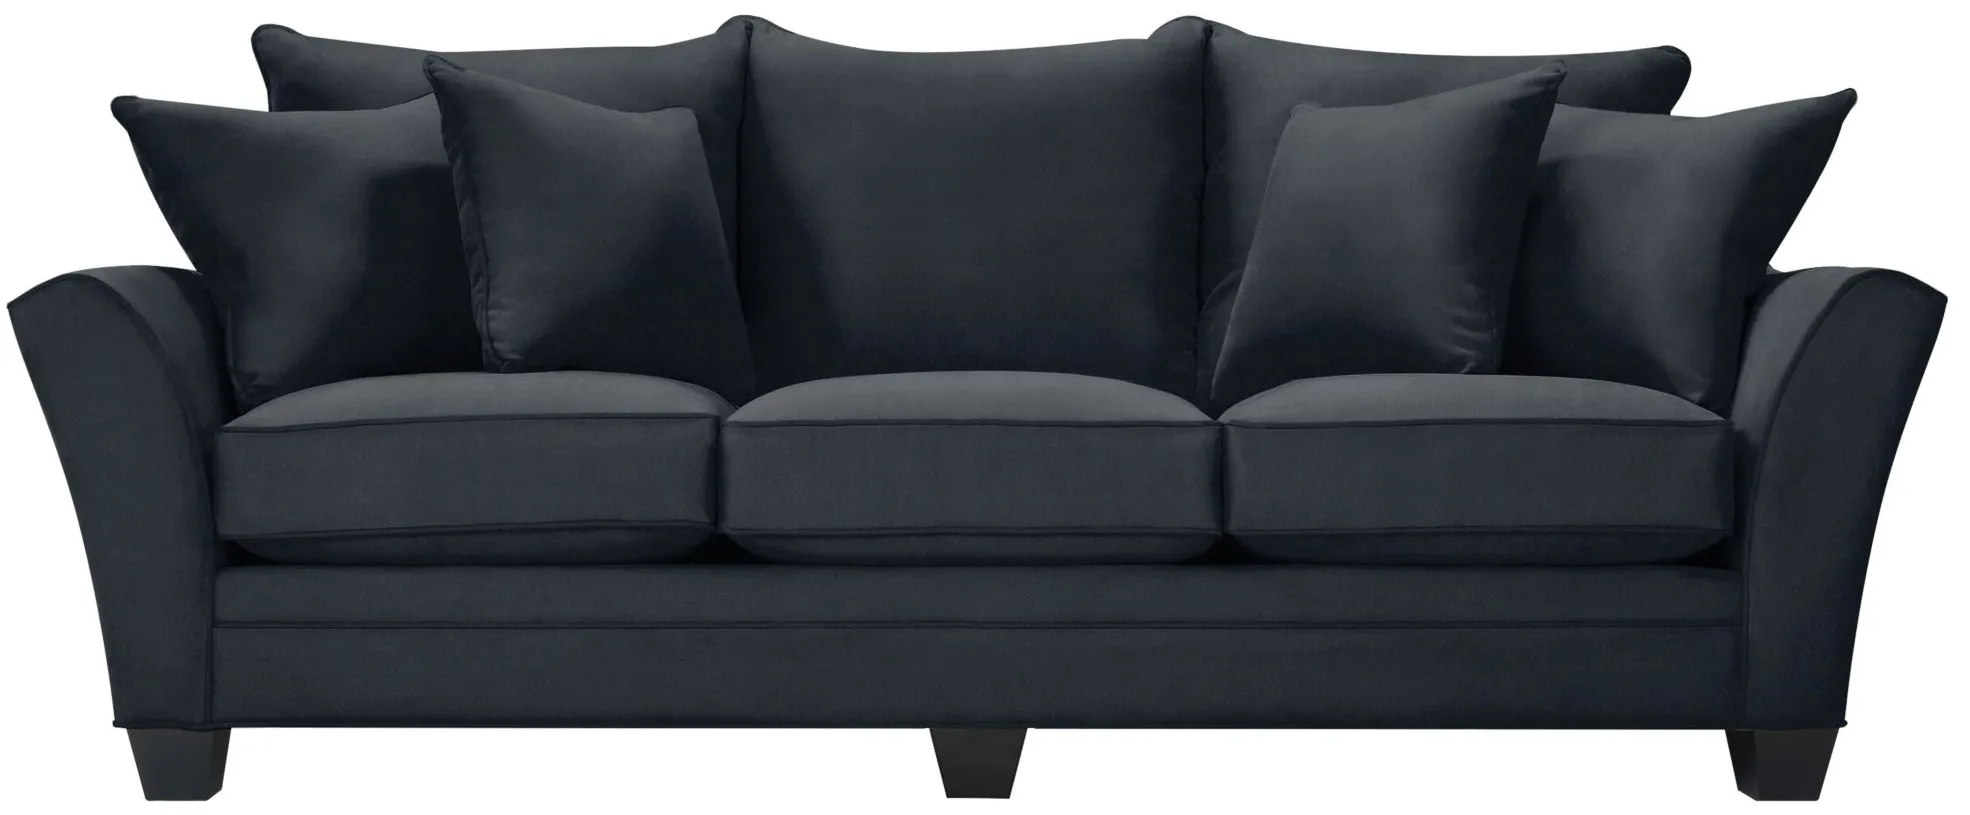 Briarwood Queen Plus Sleeper Sofa in Suede So Soft Midnight by H.M. Richards